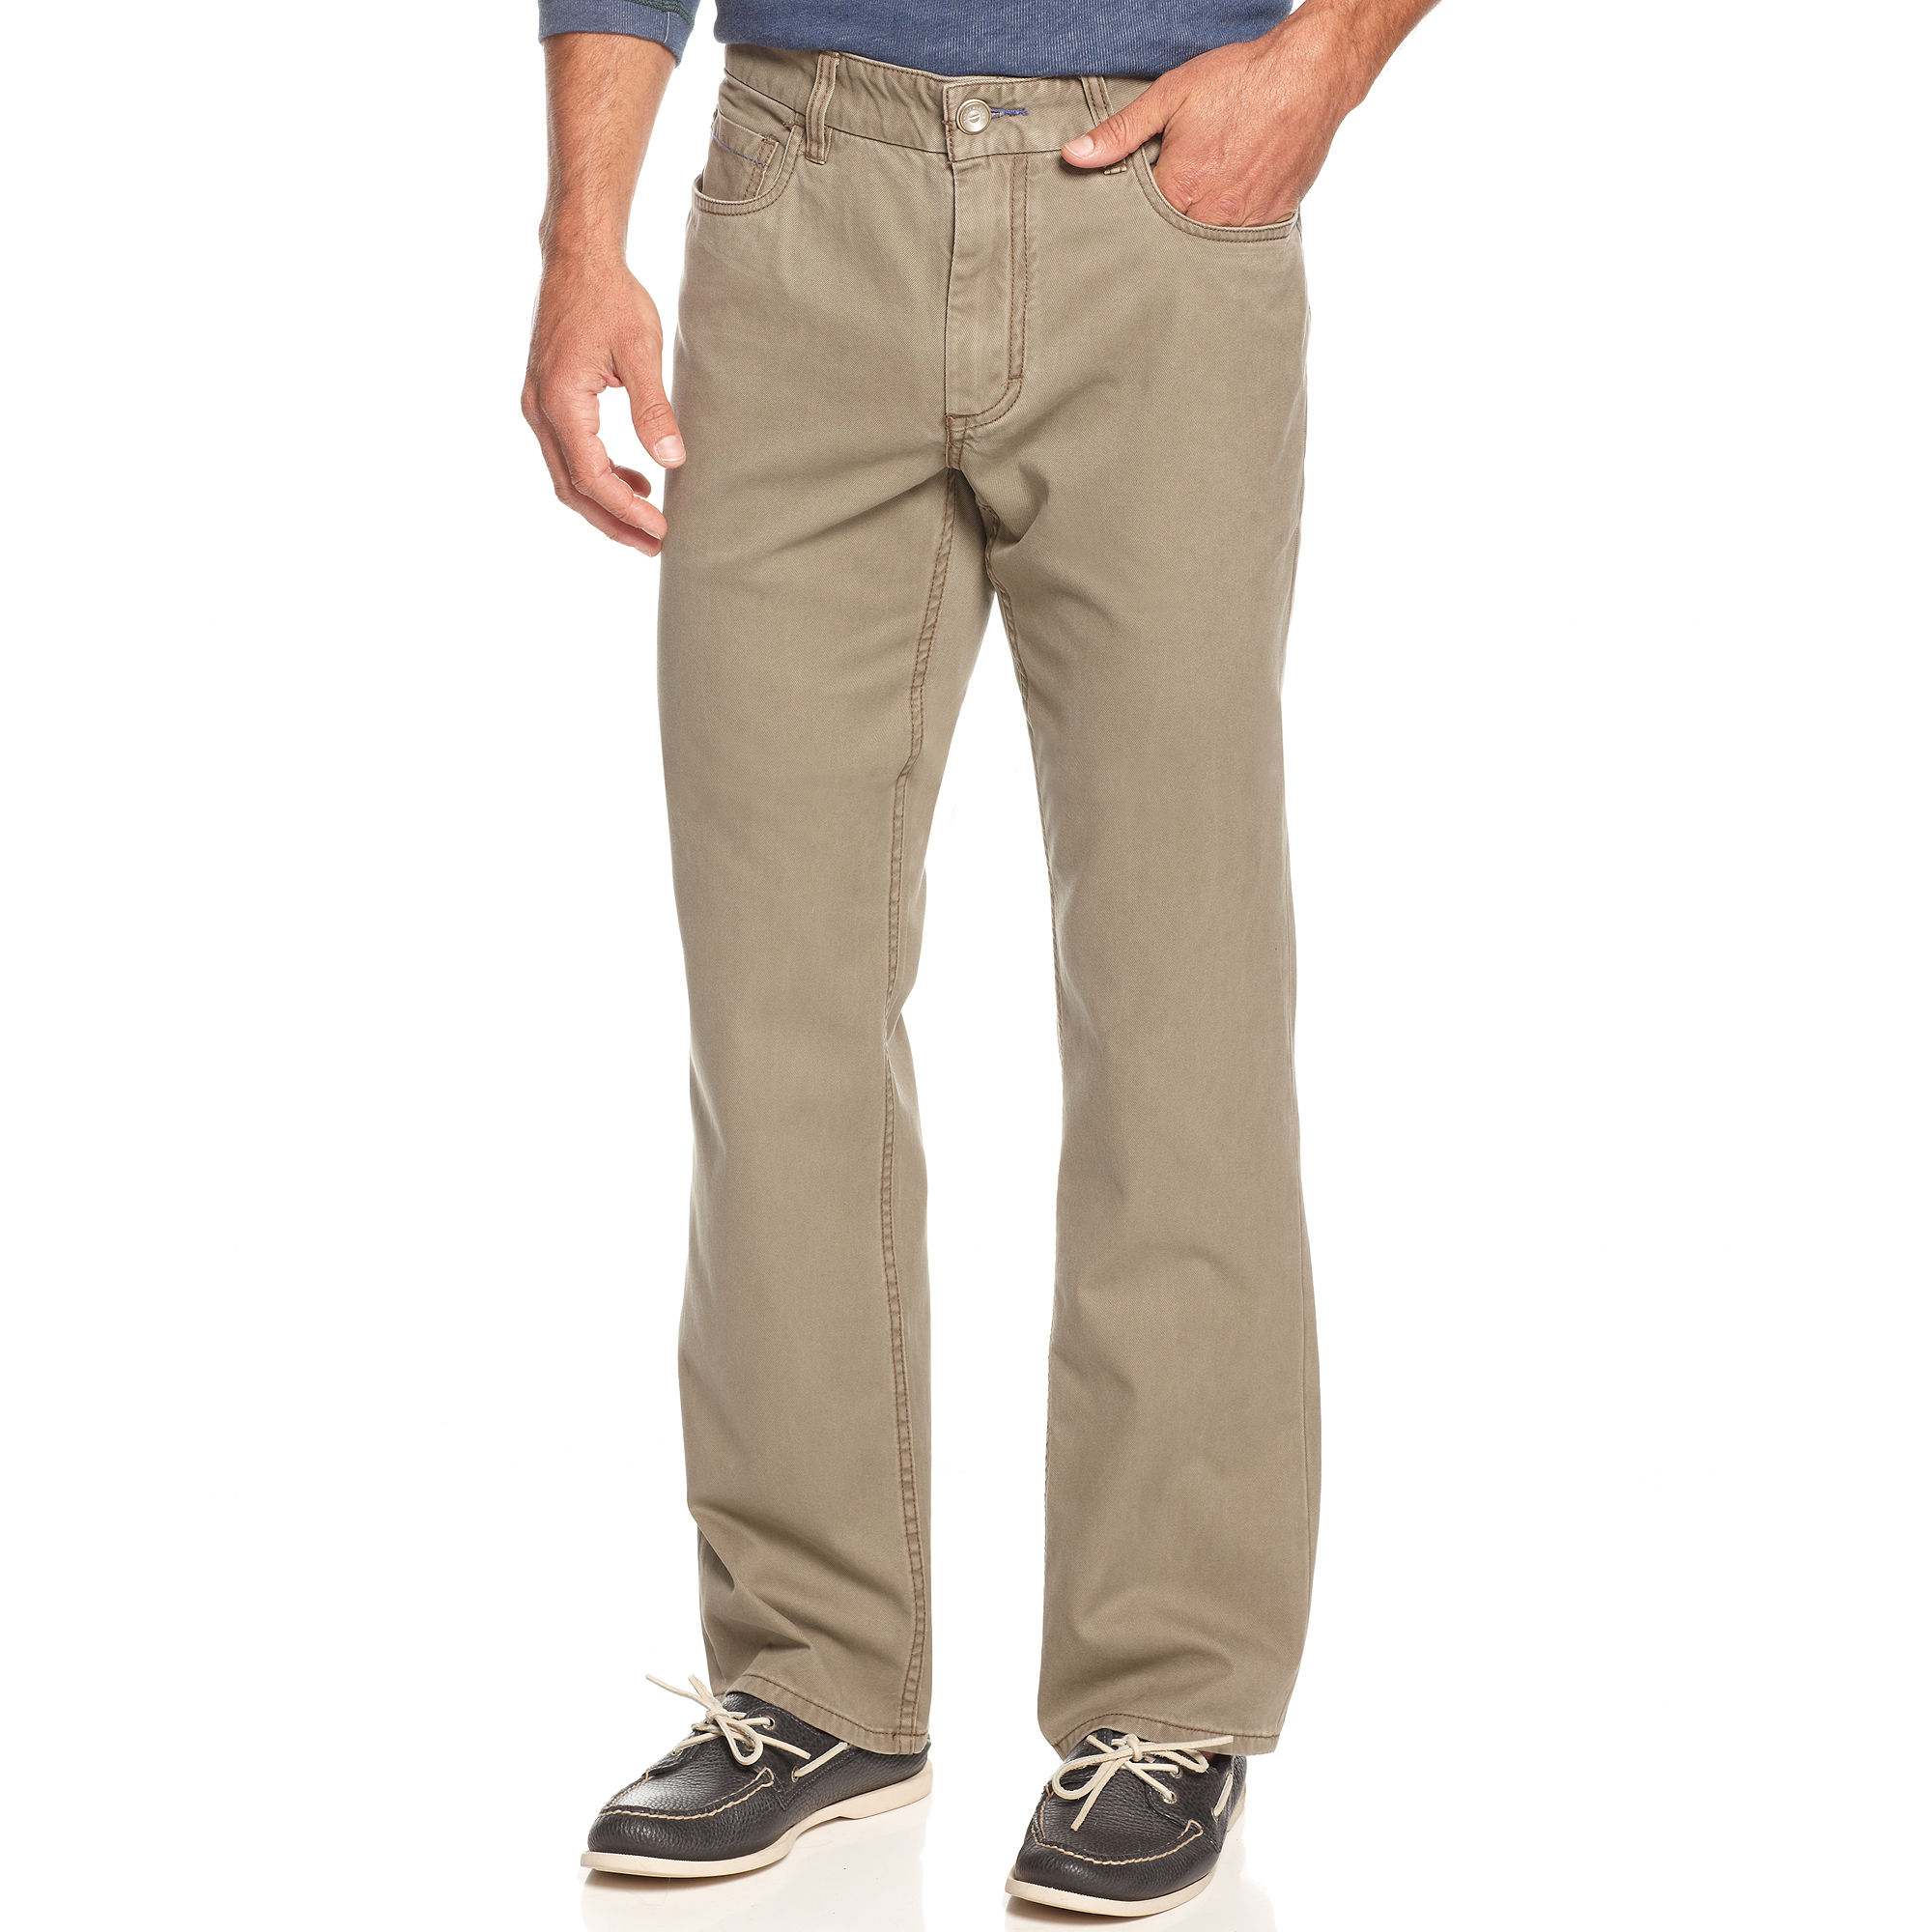 Tommy Bahama Lewis Authentic Pant in Natural for Men - Lyst